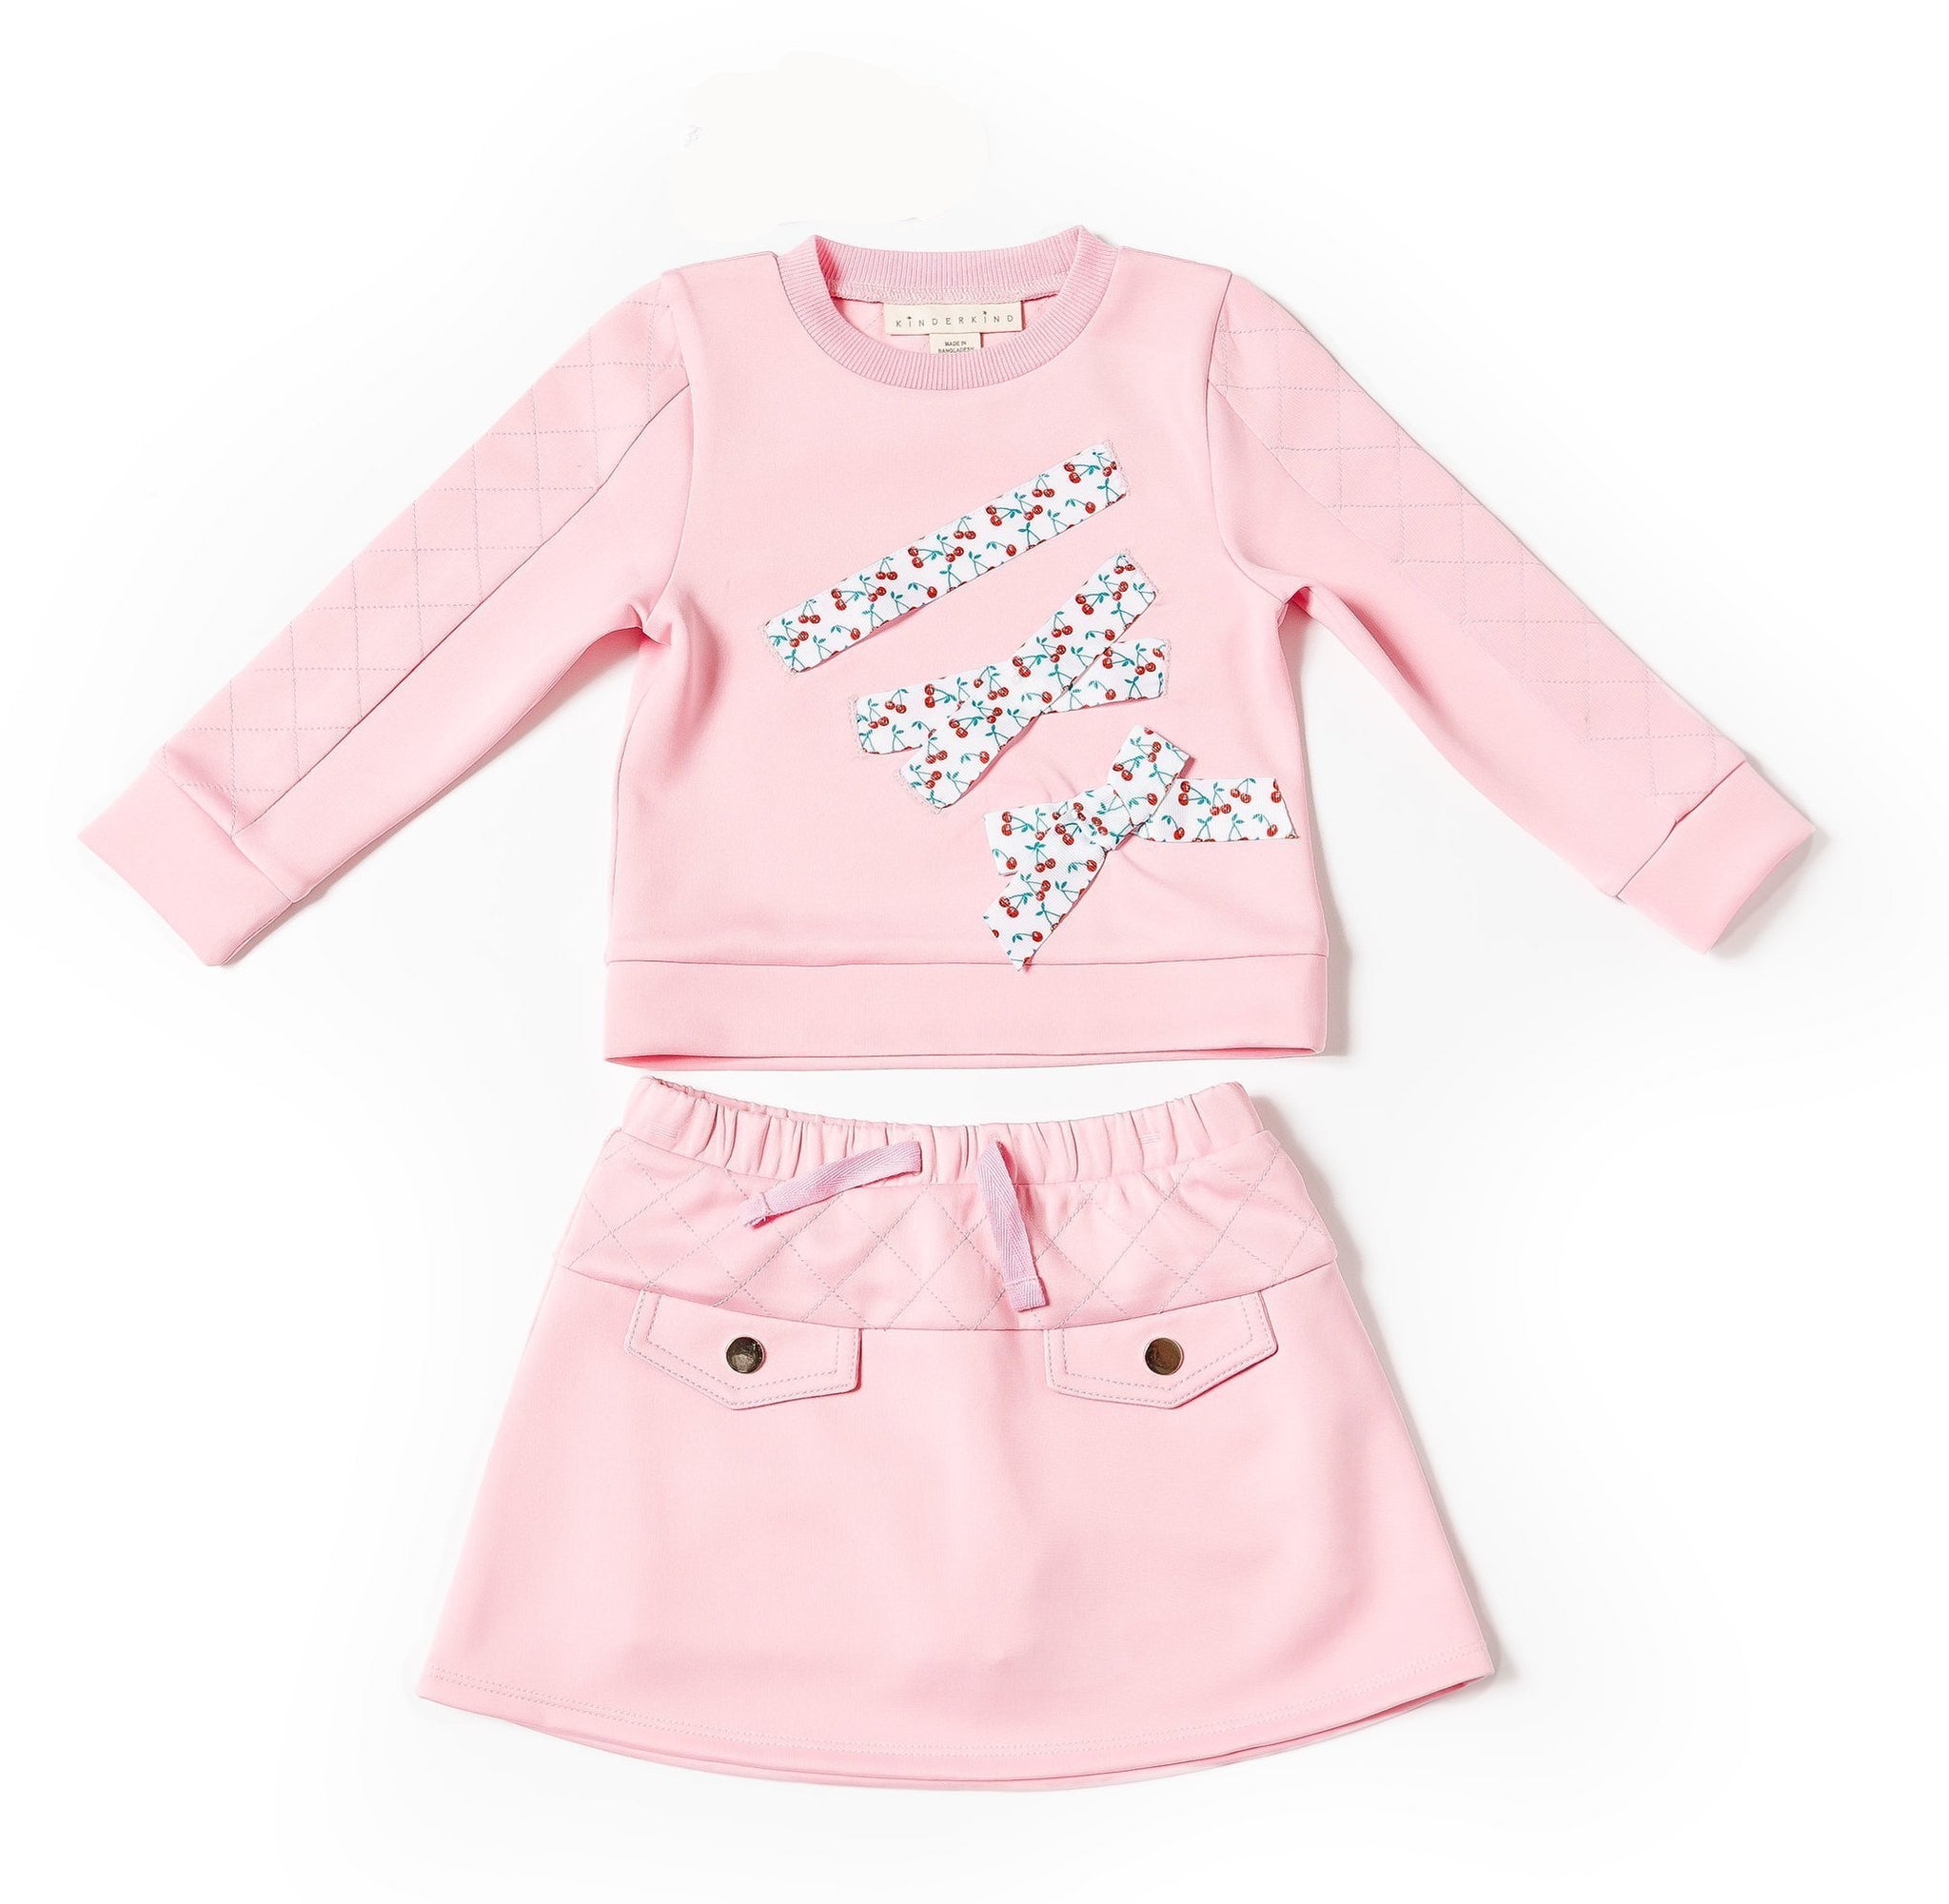 2t baby clothes